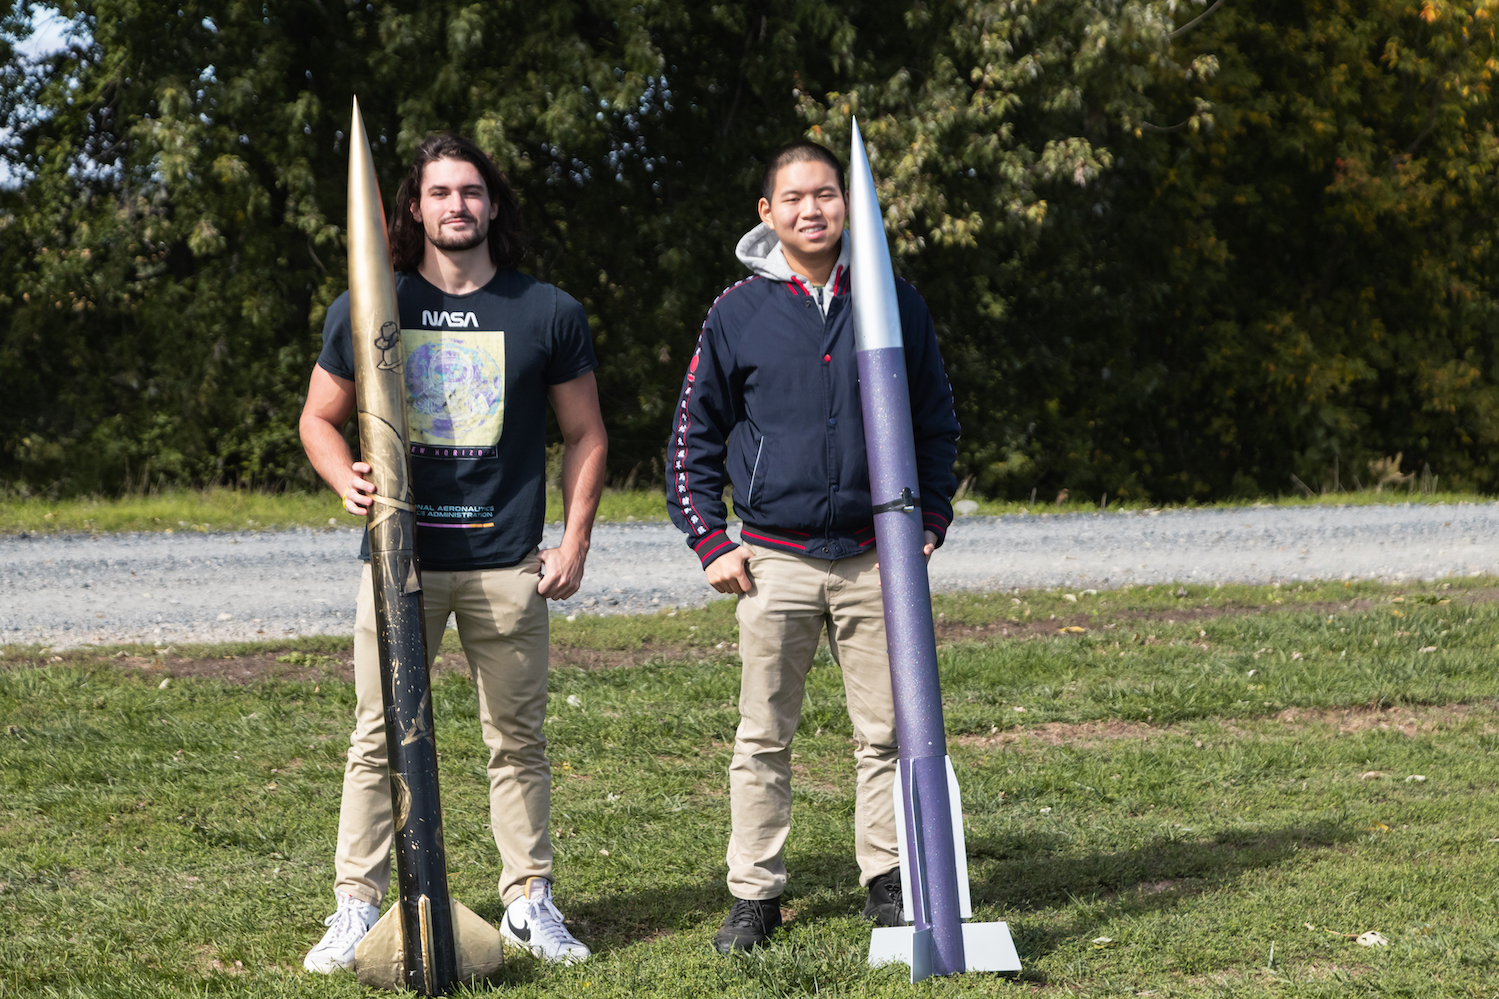 Alex Miller (left) and Alex Xu (right) pose for a photo with their rockets. Miller’s has a gold-and-black design and short angular fins. Xu’s has a purple-and-silver design and straight fins.